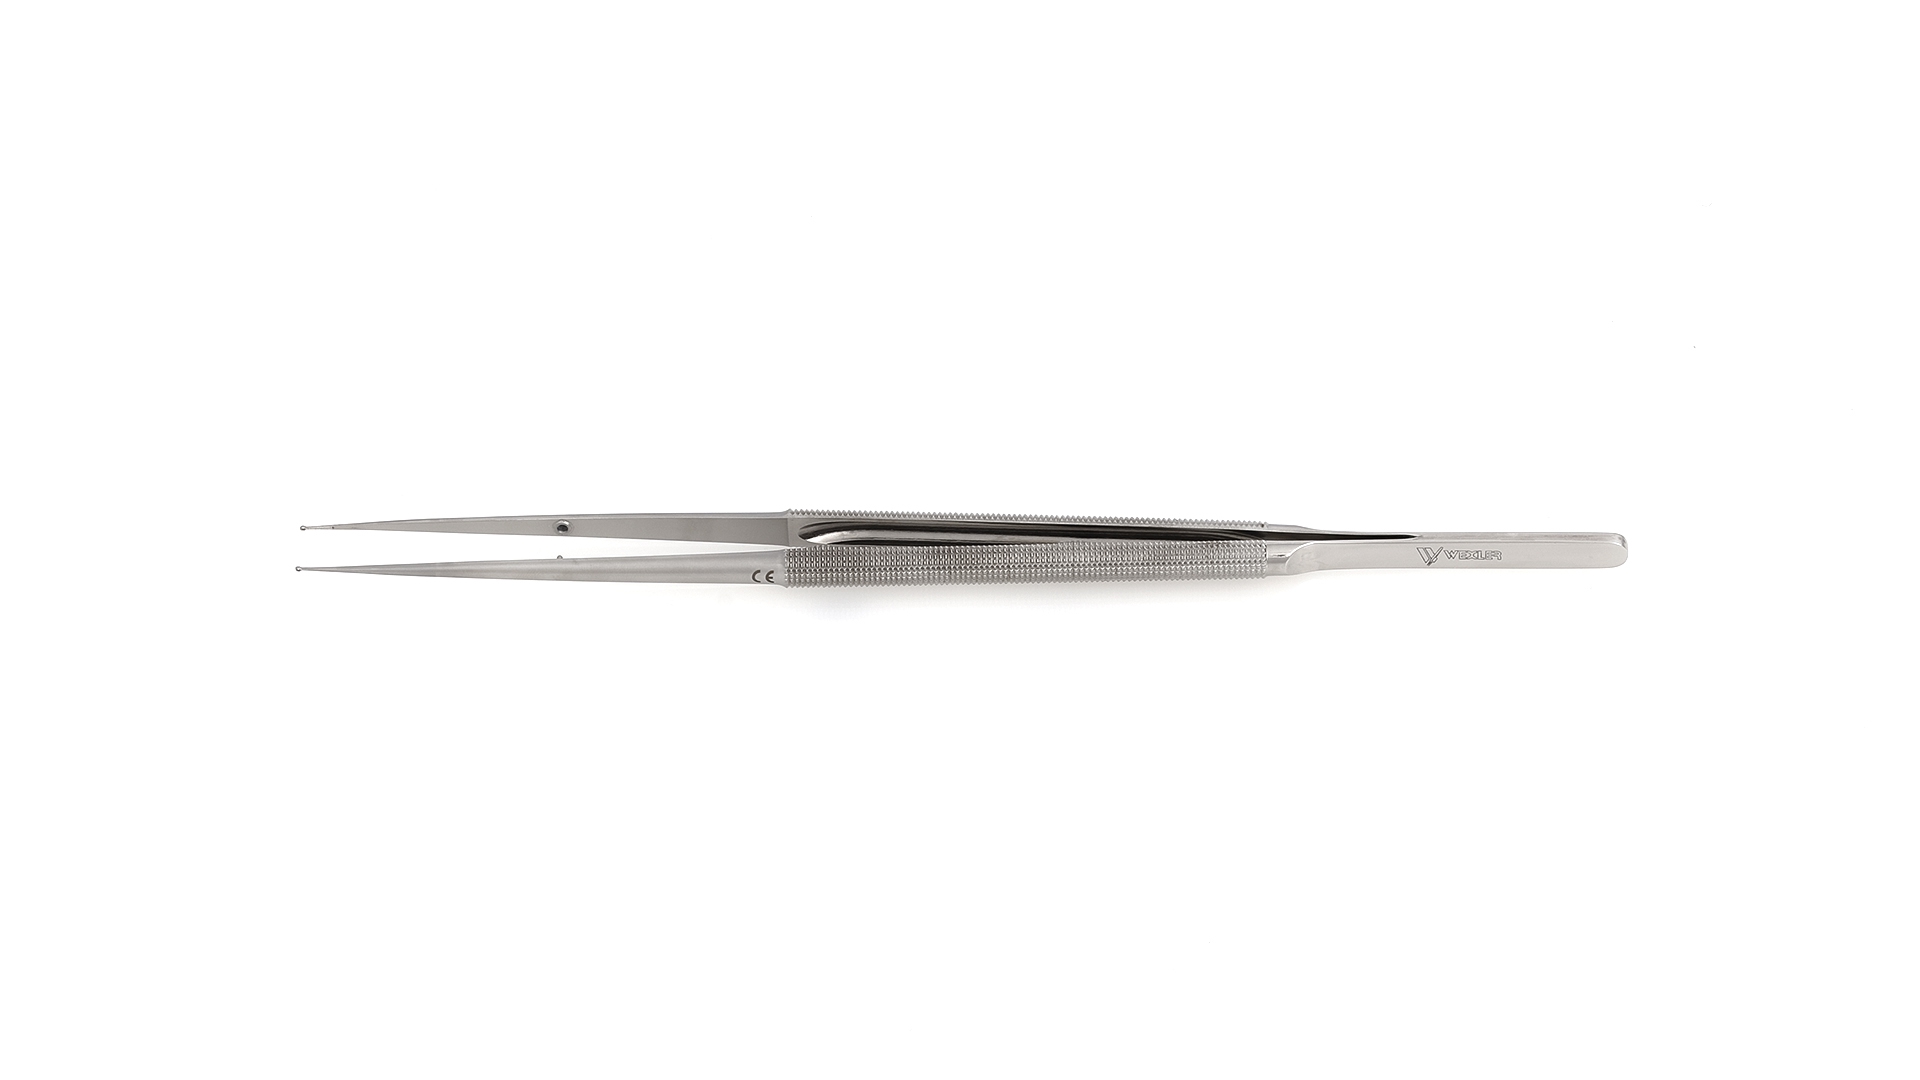 Ring tip Forceps - Straight 1mm TC coated rings